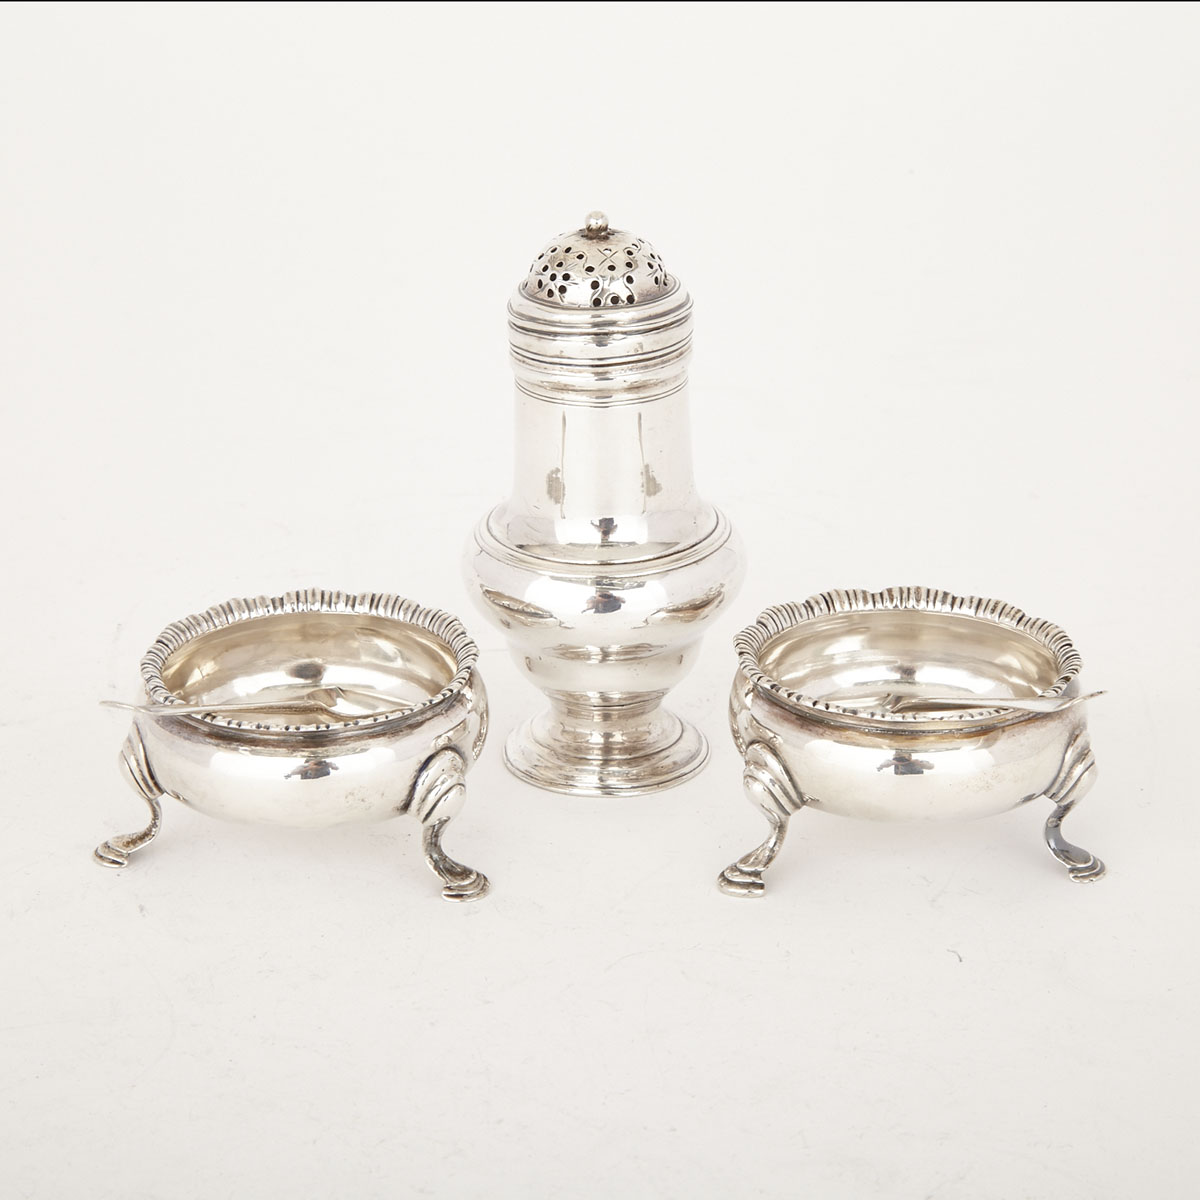 George III Silver Caster, London 1766 and Pair of Salt Cellars with Spoons,  London, 1764